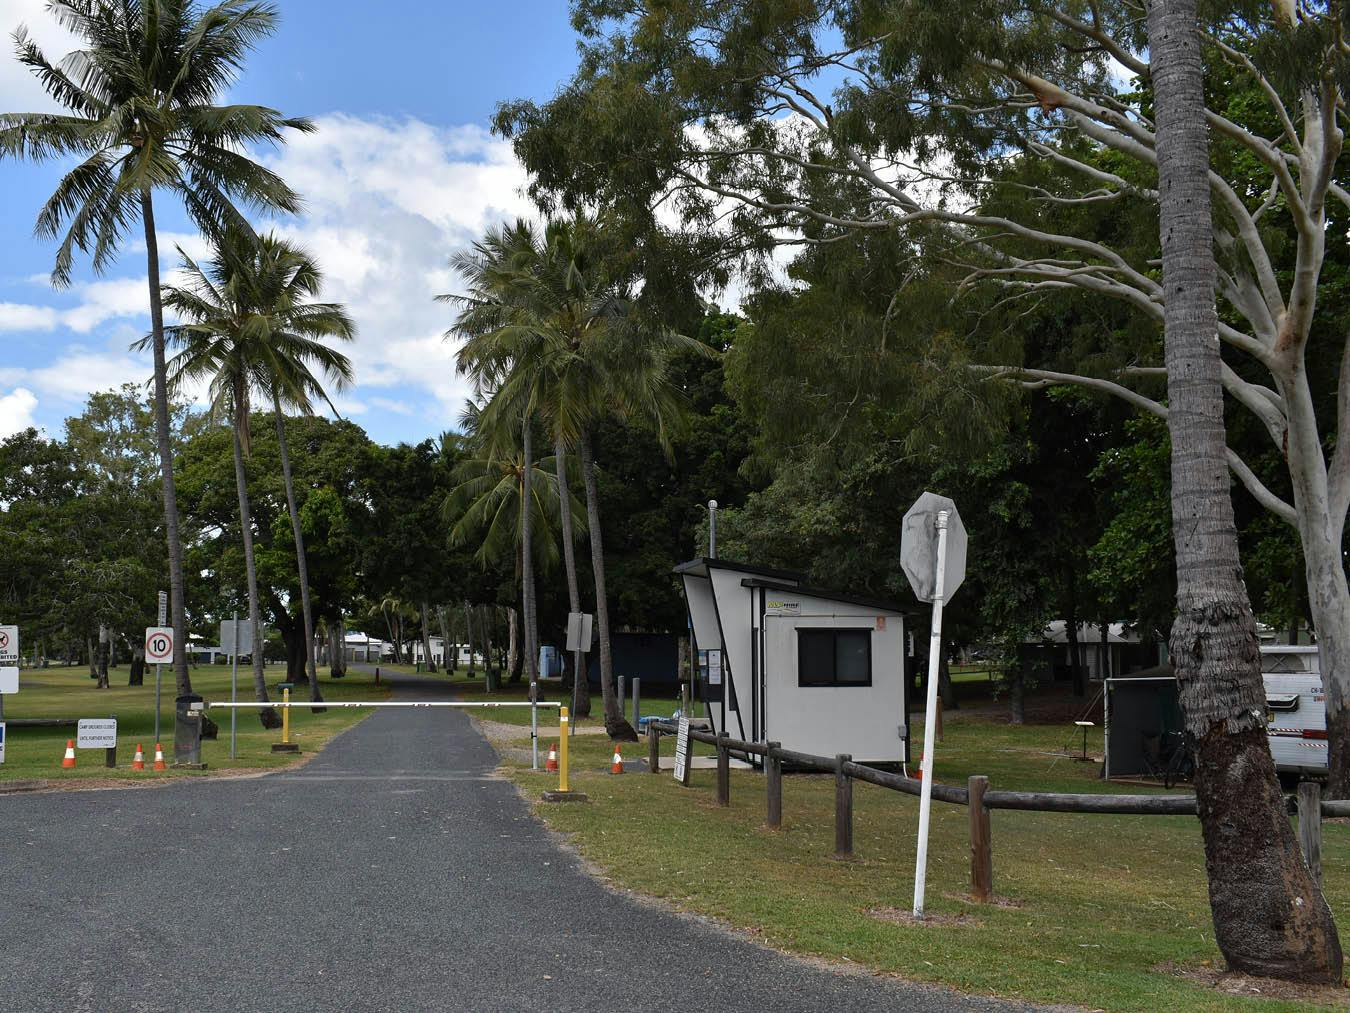 Intersection 1 - This photograph is looking east into the main entrance to the camping grounds. Caretaker's hut is to the right.